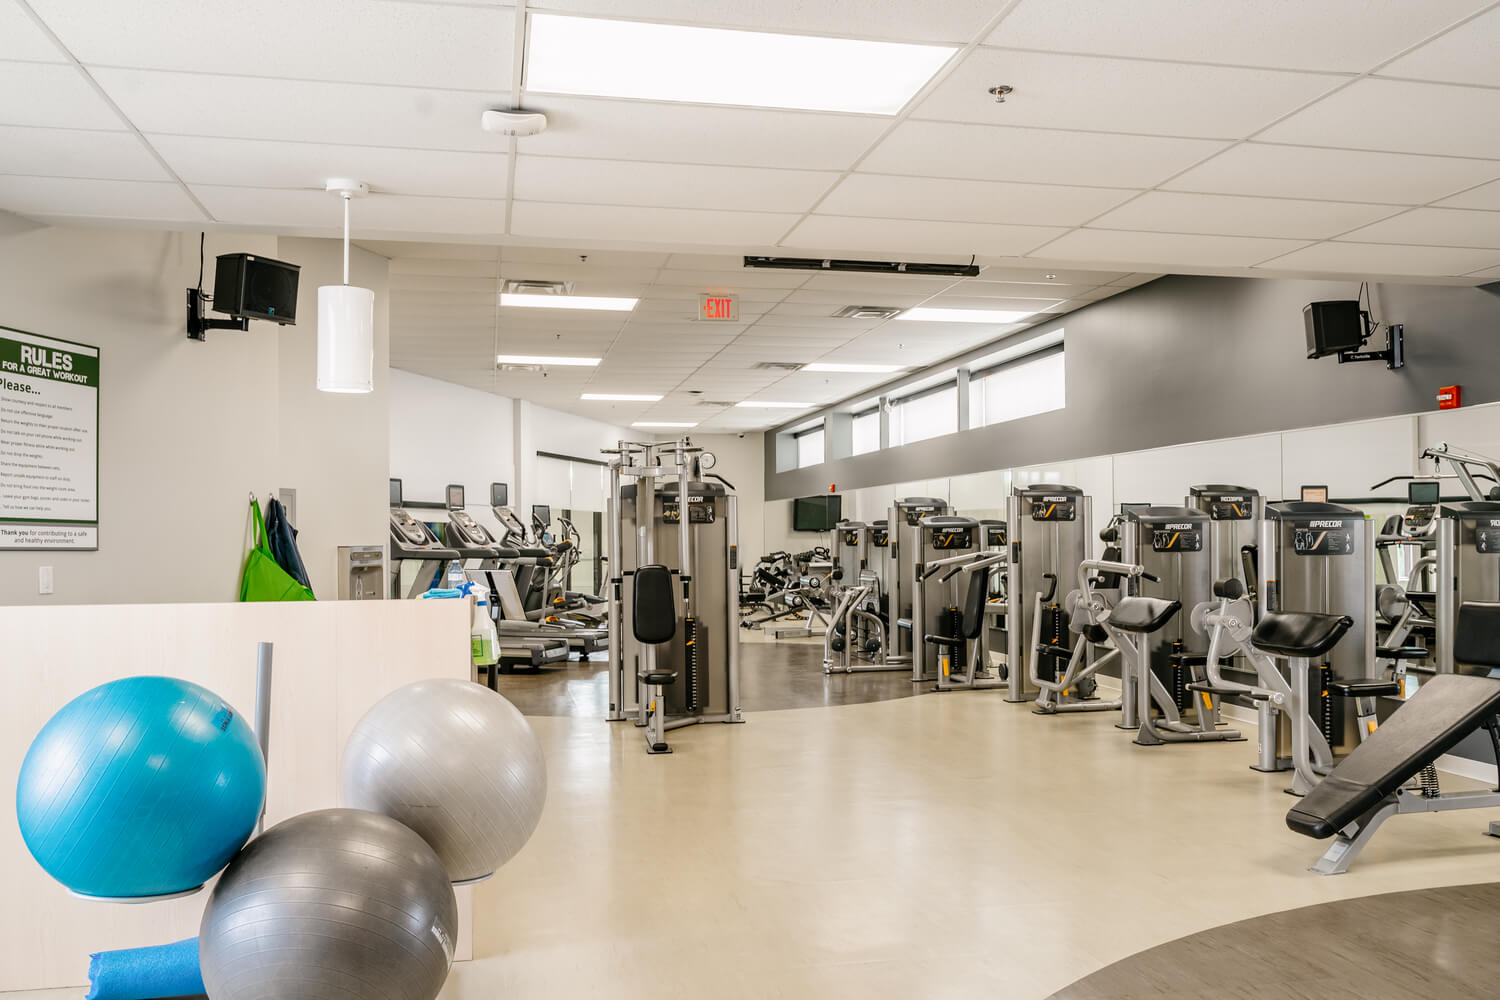 The Fitness Zone has rows of treadmills on the back wall, a welcome desk on the left wall, and weight machines on the right wall.